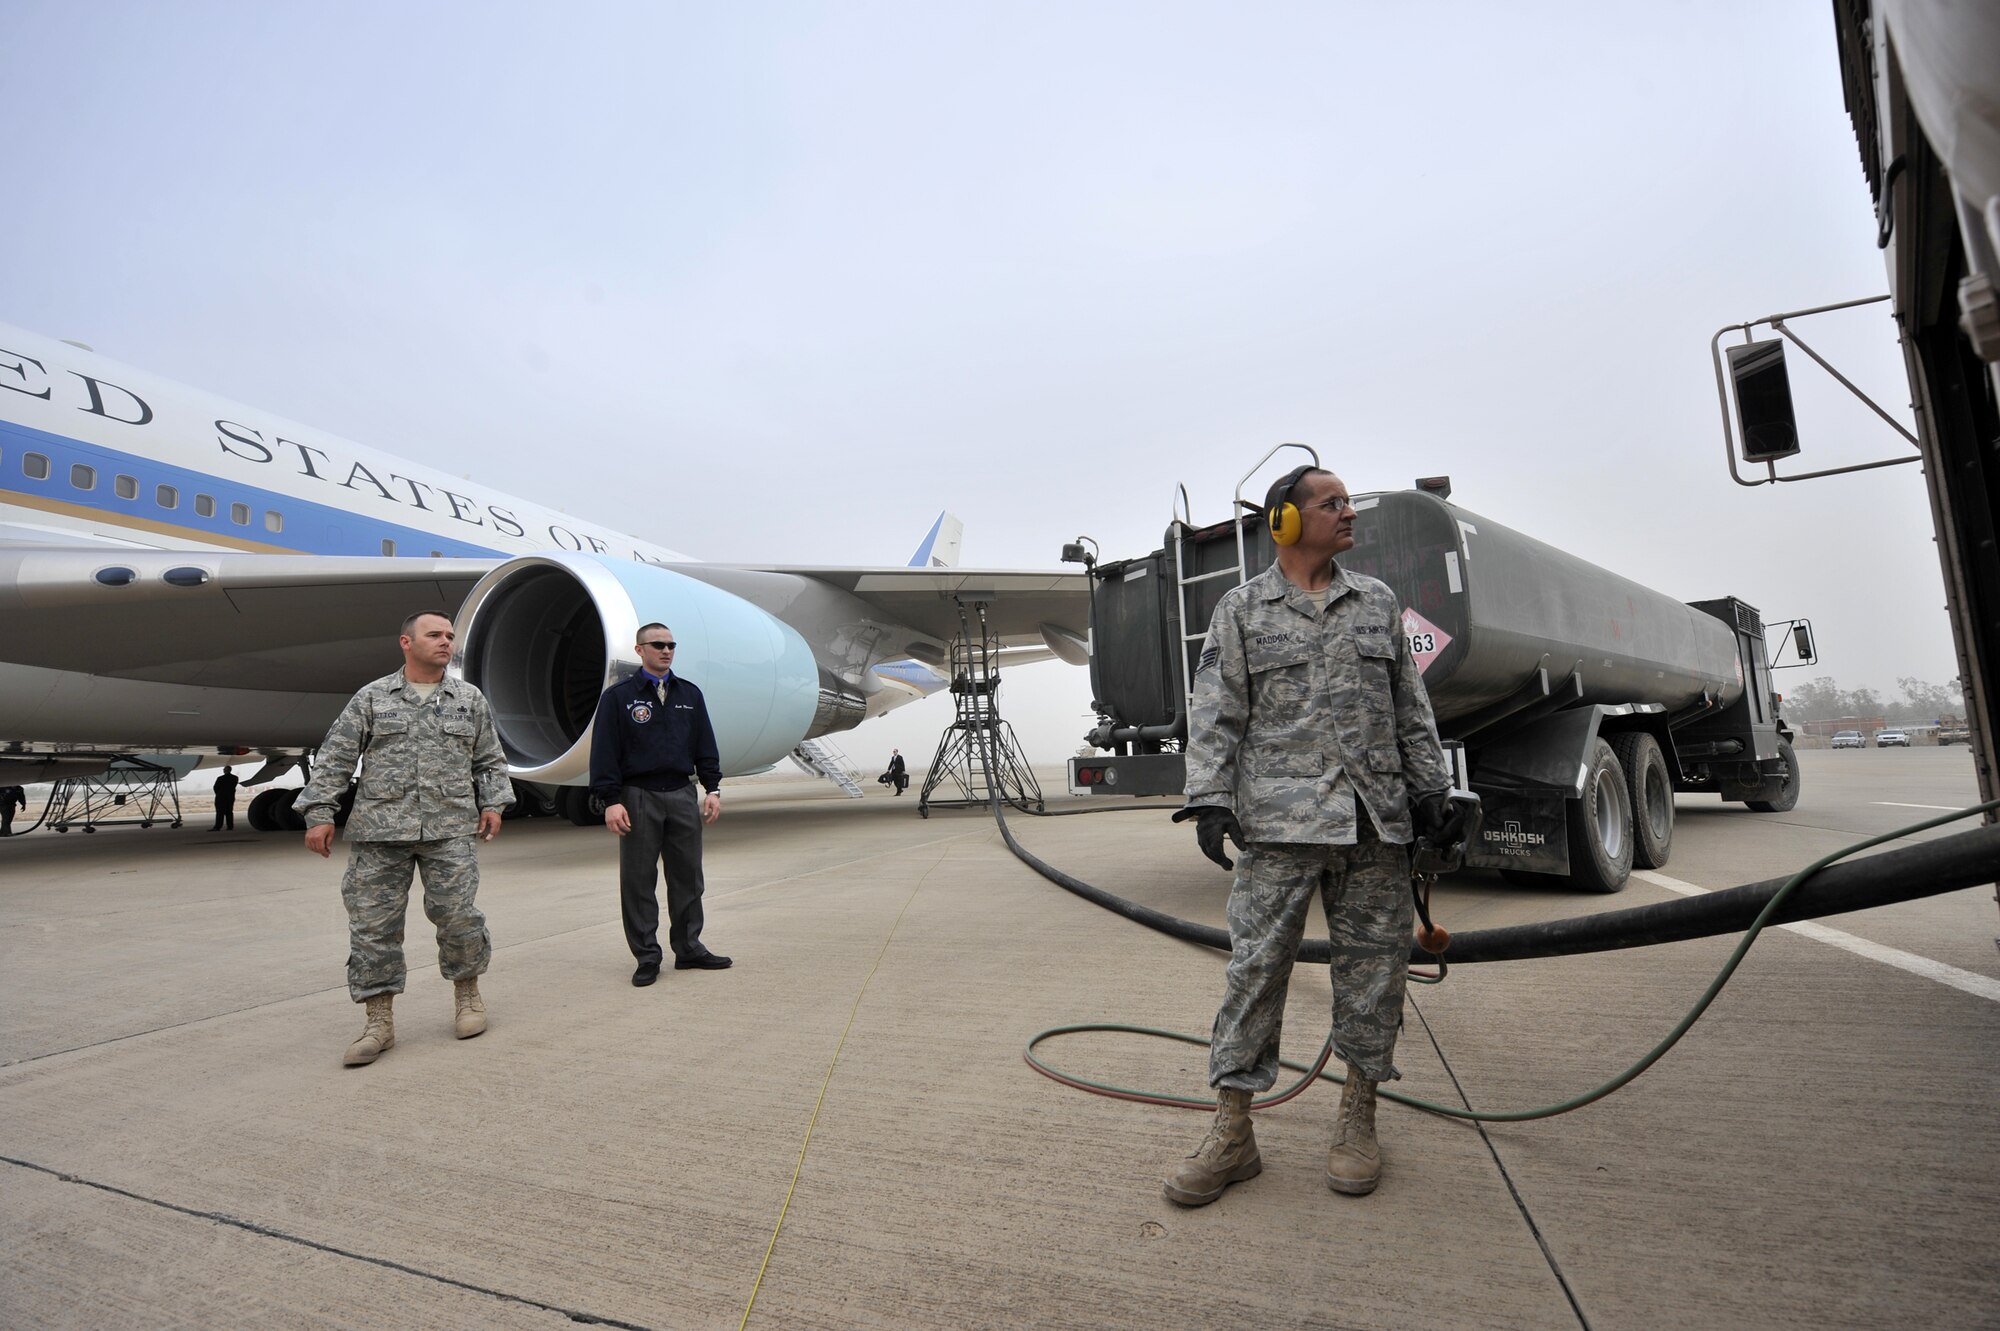 SATHER AIR BASE, Iraq, - Staff Sgt. Donald Maddox, a 447th Expeditionary Logistics Readiness Squadron fuel distribution technician, refuels Air Force One April 7 on the flightline here while Master Sgt. Joel Sutton, 447th ELRS fuels manager, and an Air Force One crew chief stand ready to assist. Members of the 447th ELRS refueled Air Force One after President Barack Obama landed here for an unannounced visit to servicemembers in Iraq. (U.S. Air Force Photo by Staff Sgt. Amanda Currier)